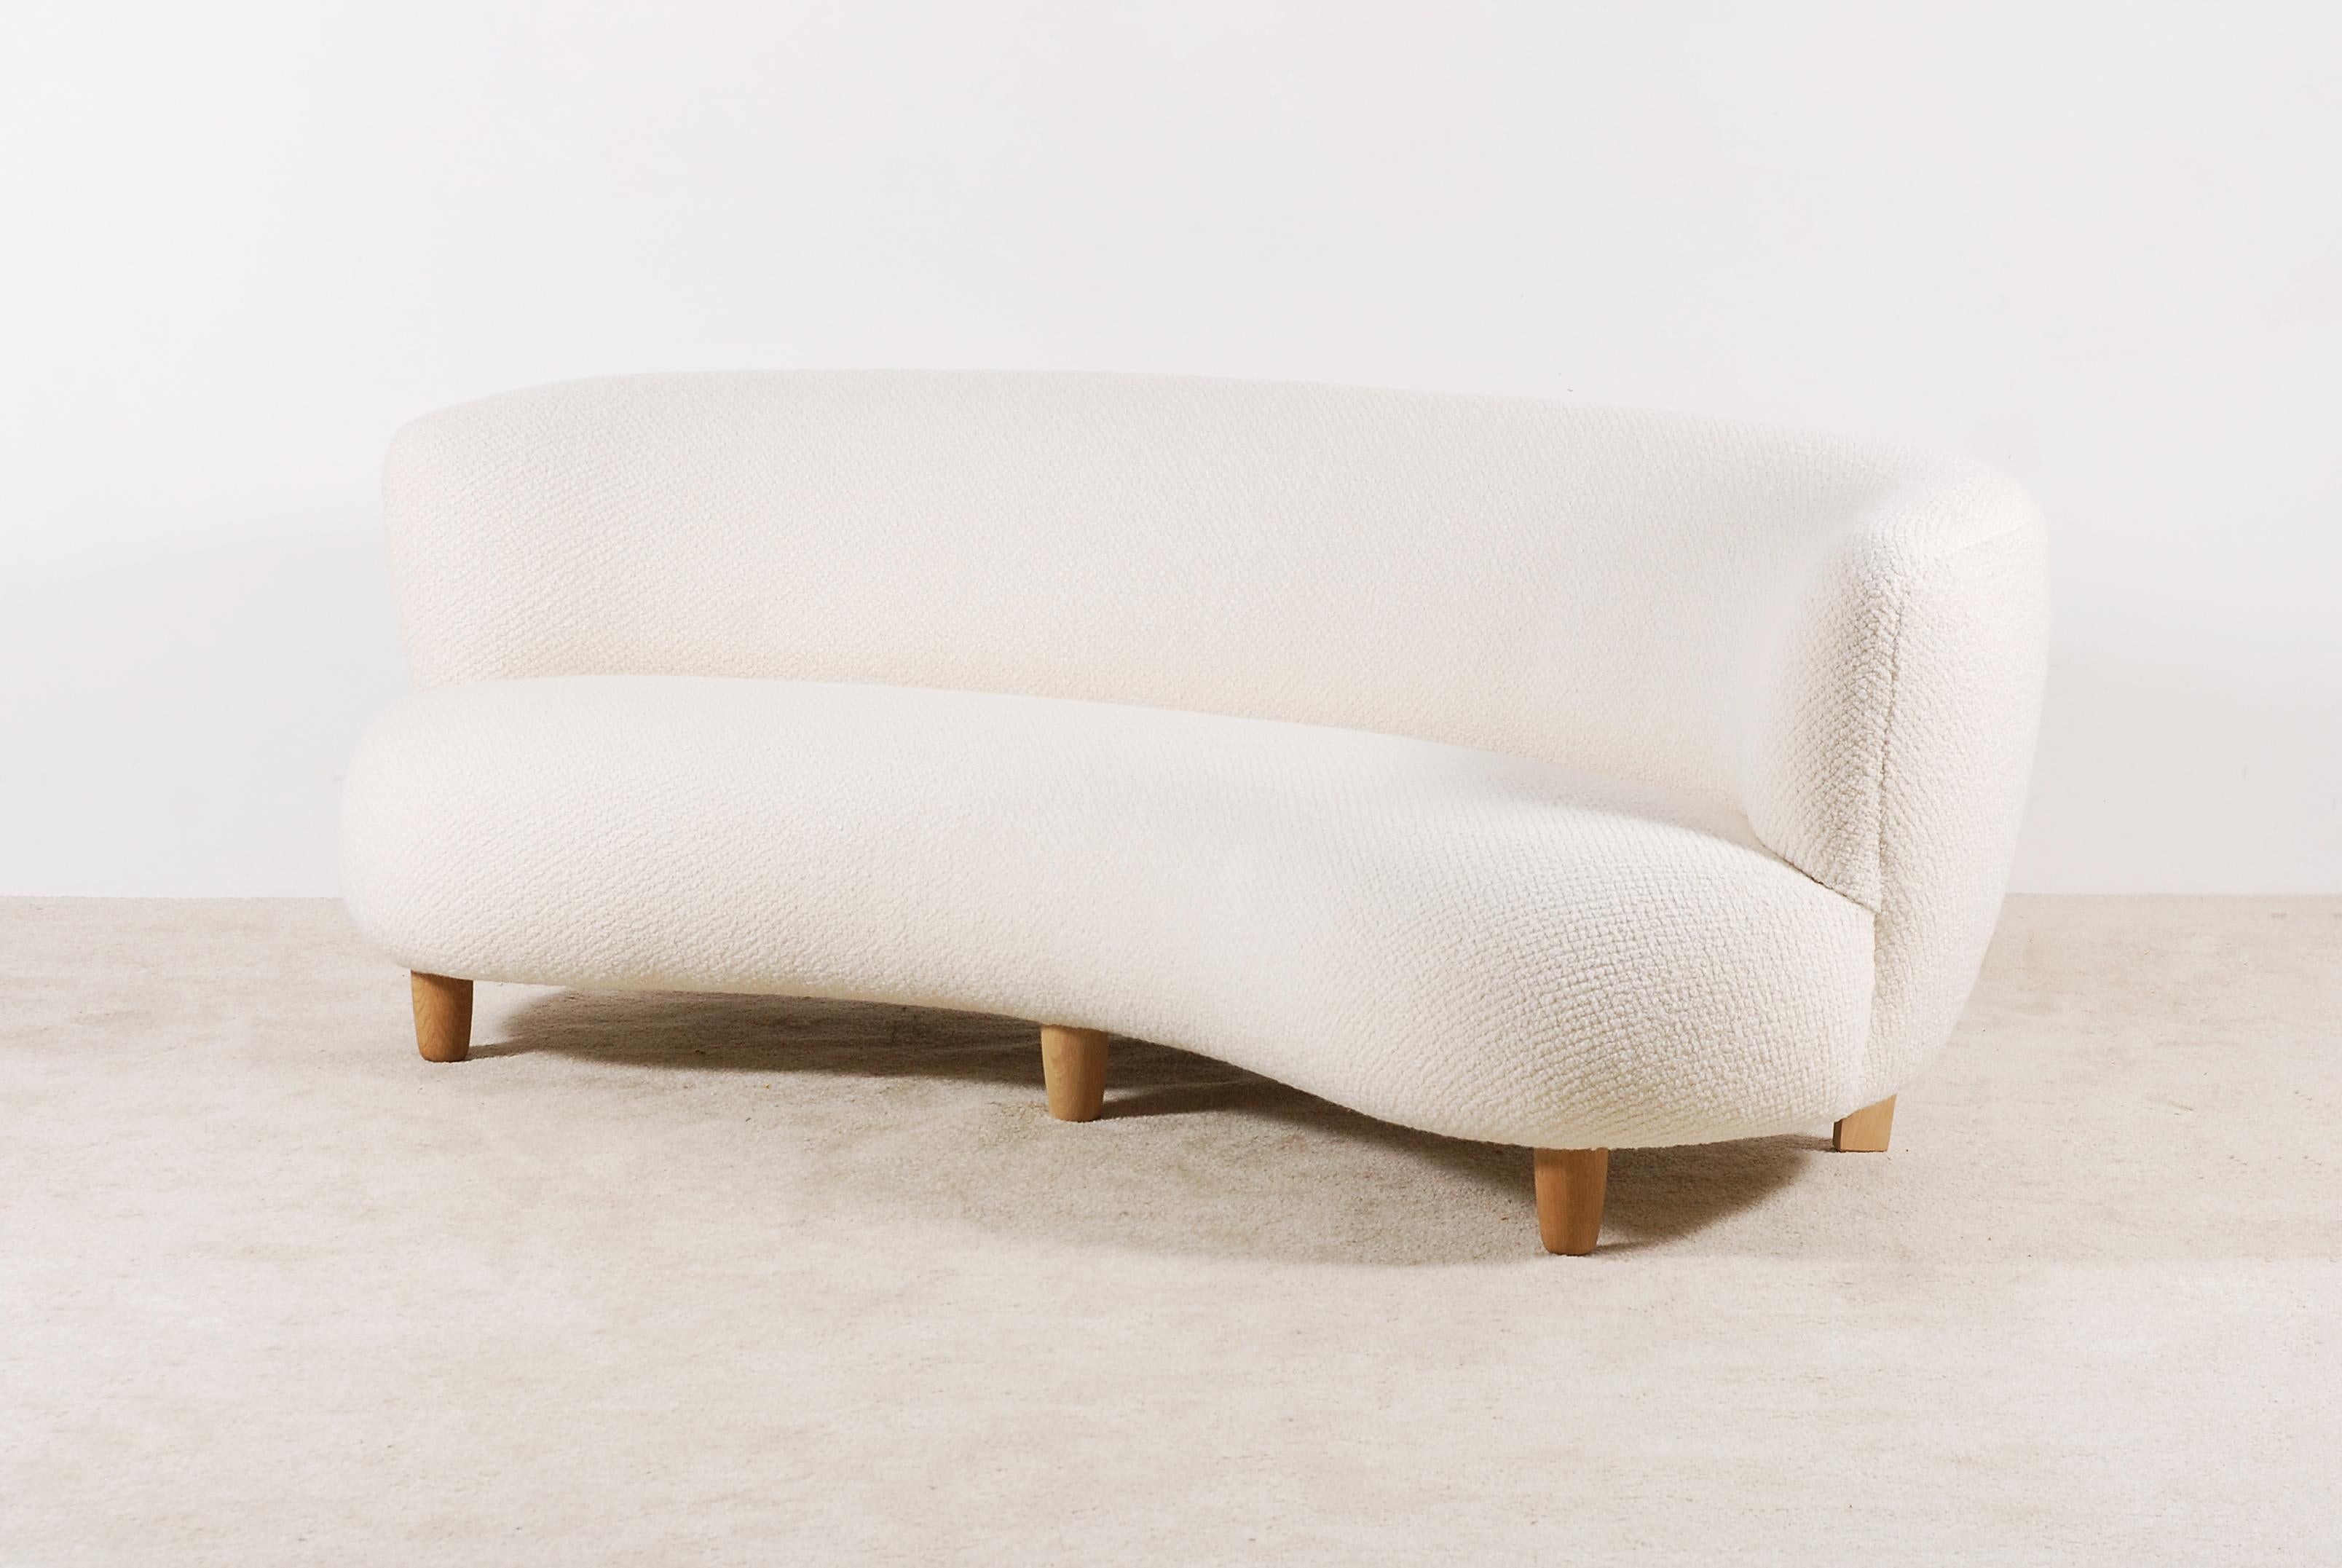 Scandinavian Modern Swedish Curved Sofa Attributed to Otto Schulz for Boet, 1940s